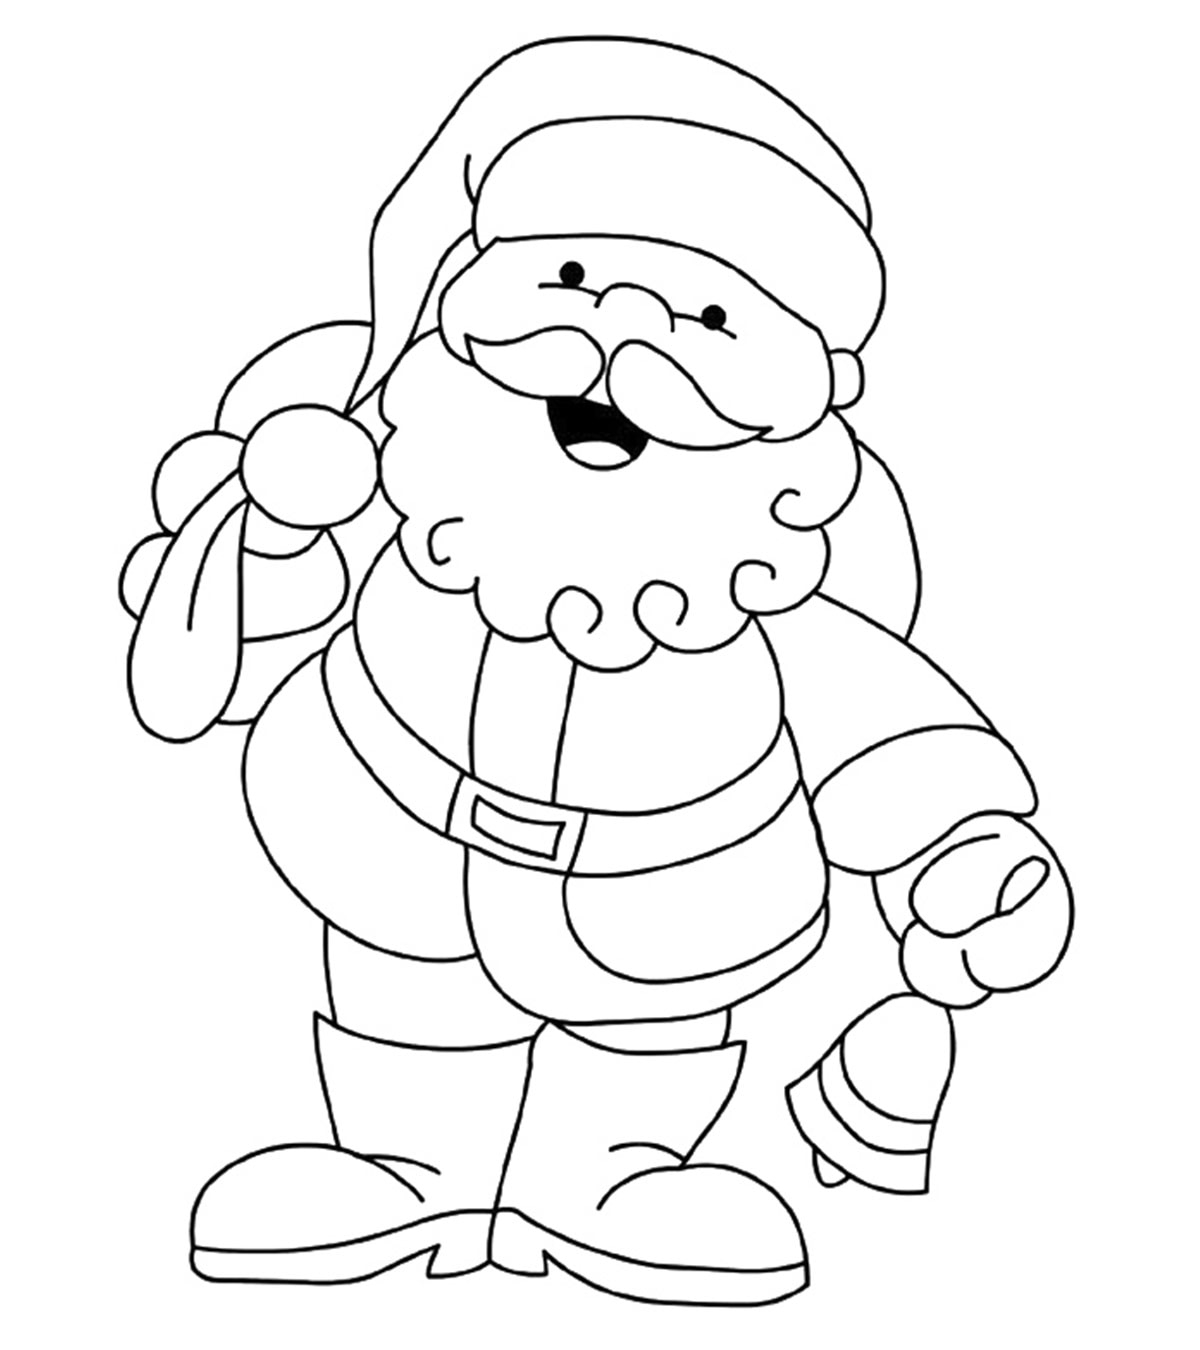 48 Coloring Pages For Kids Christmas Ornaments Images Duwa Pixel